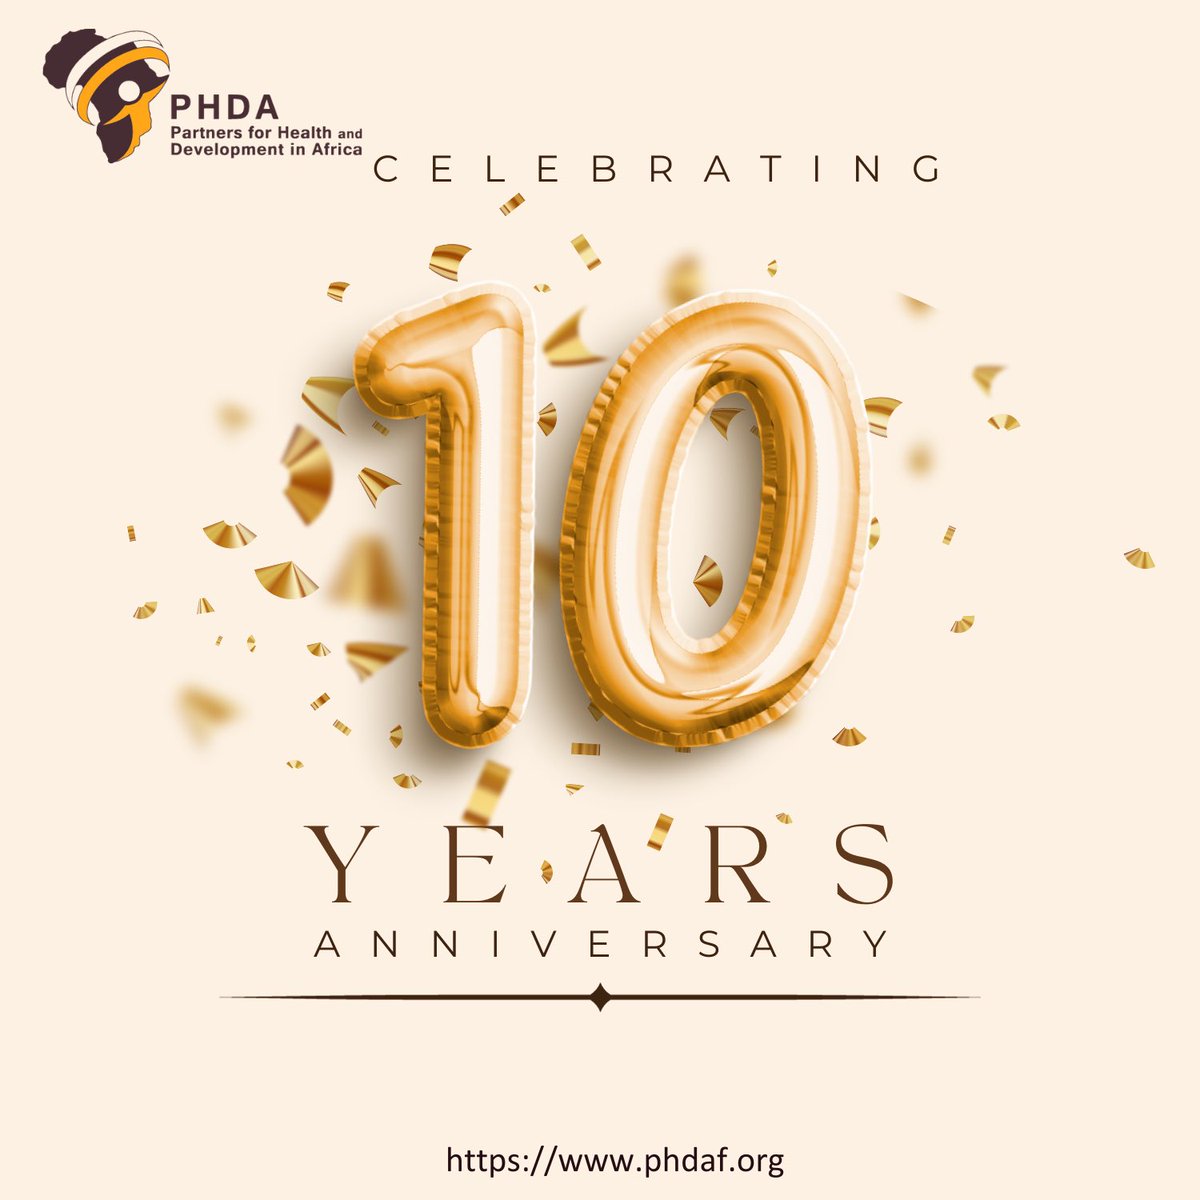 A decade of building healthy communities in Africa.